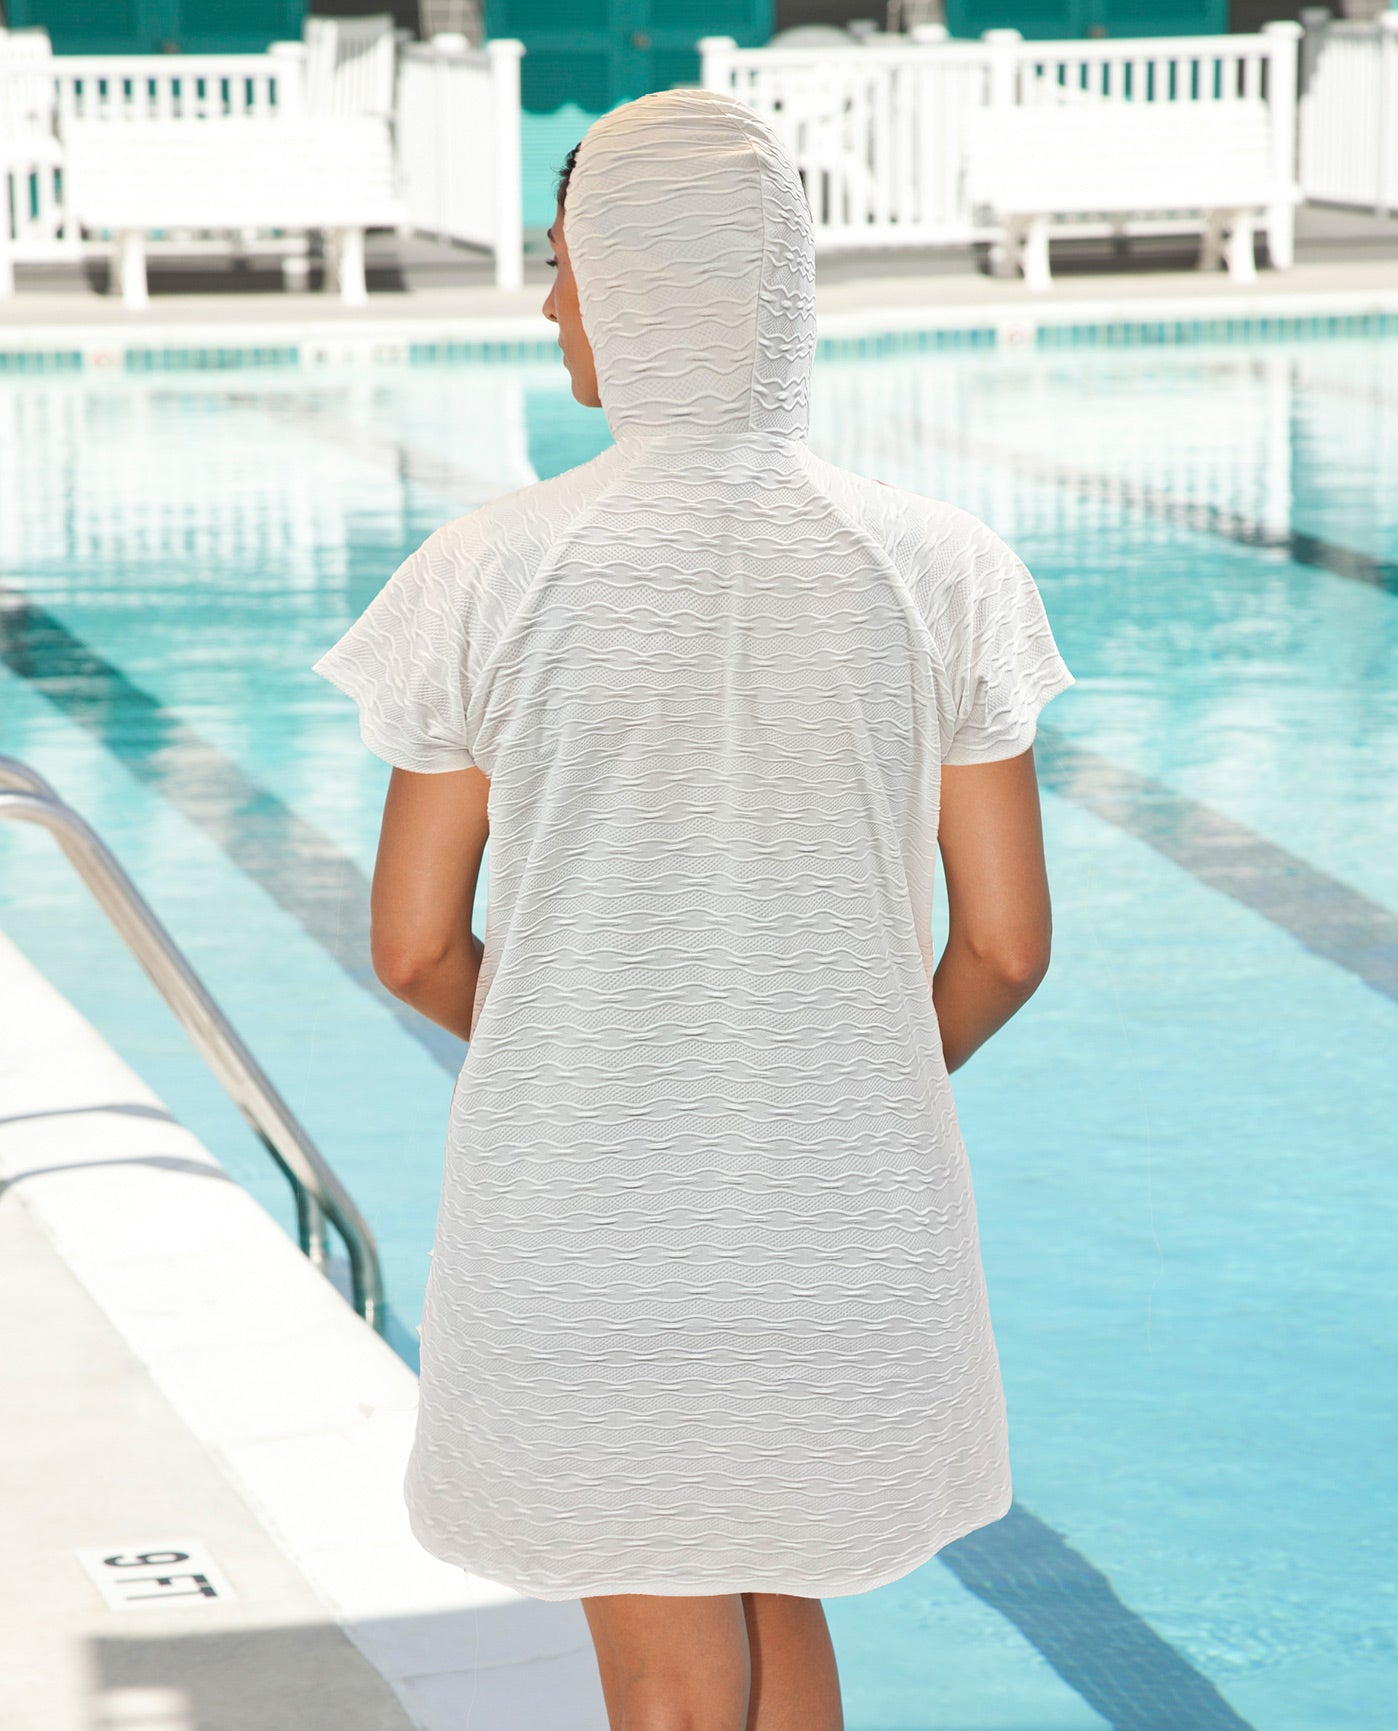 HOOD UP BACK VIEW OF AQUAMORE SOLID TEXTURED ZIPPER HOODIE COVER UP TUNIC | 016 AQM TEXTURED CREAM